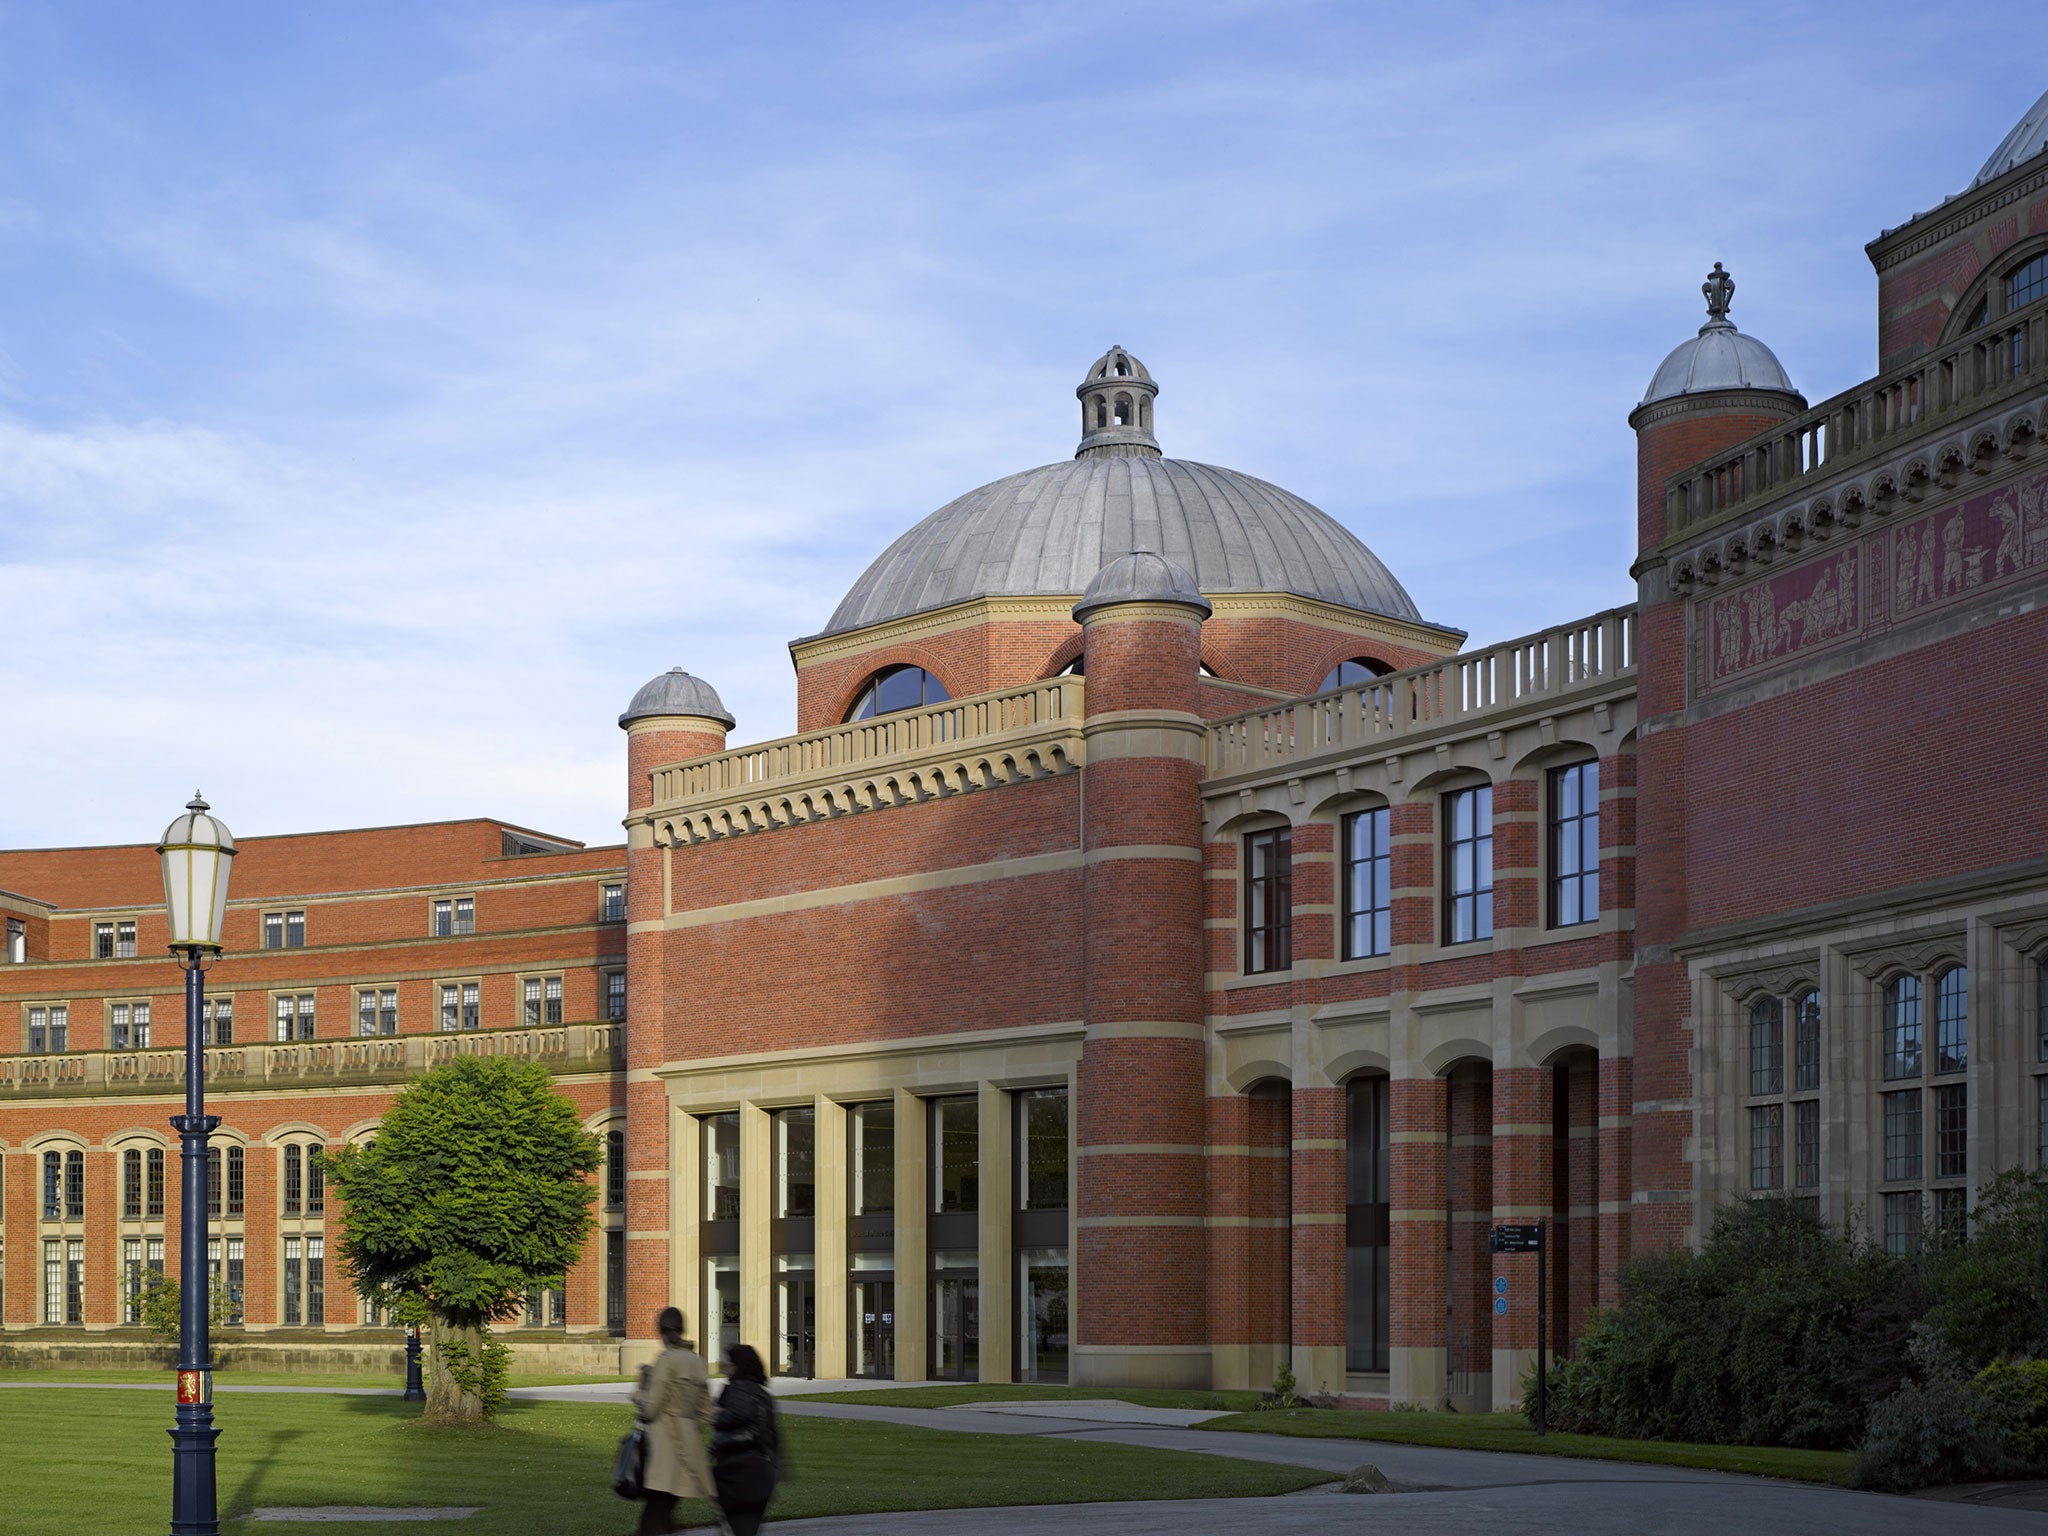 The University of Birmingham launched an investigation after a keylogger was found